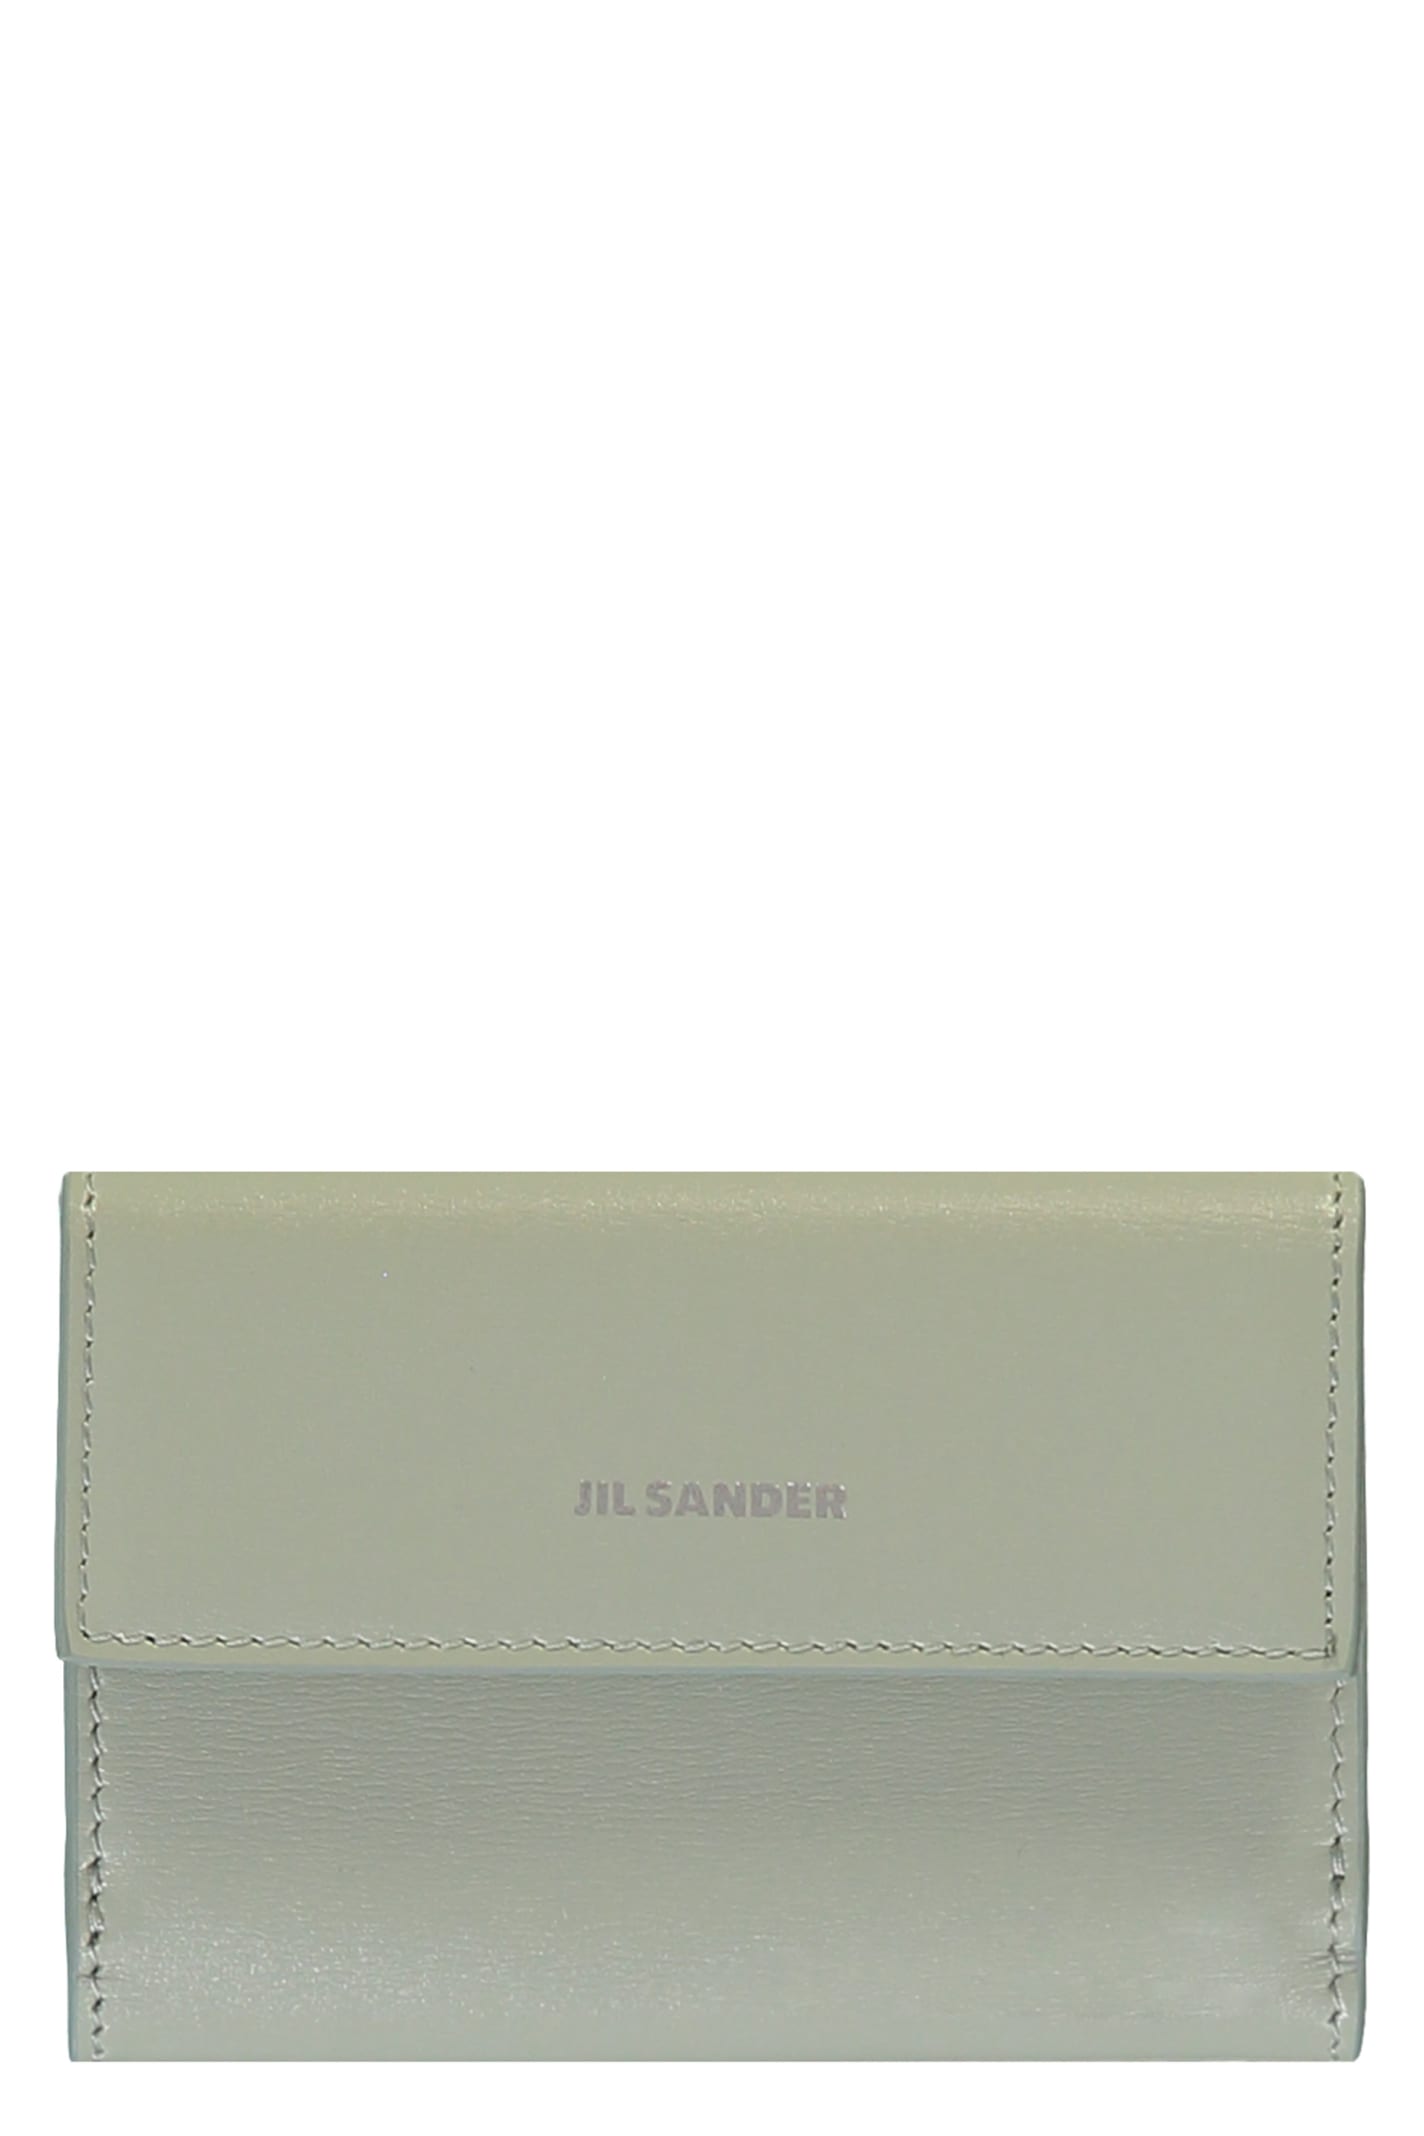 Jil Sander Small Leather Flap-over Wallet In Green